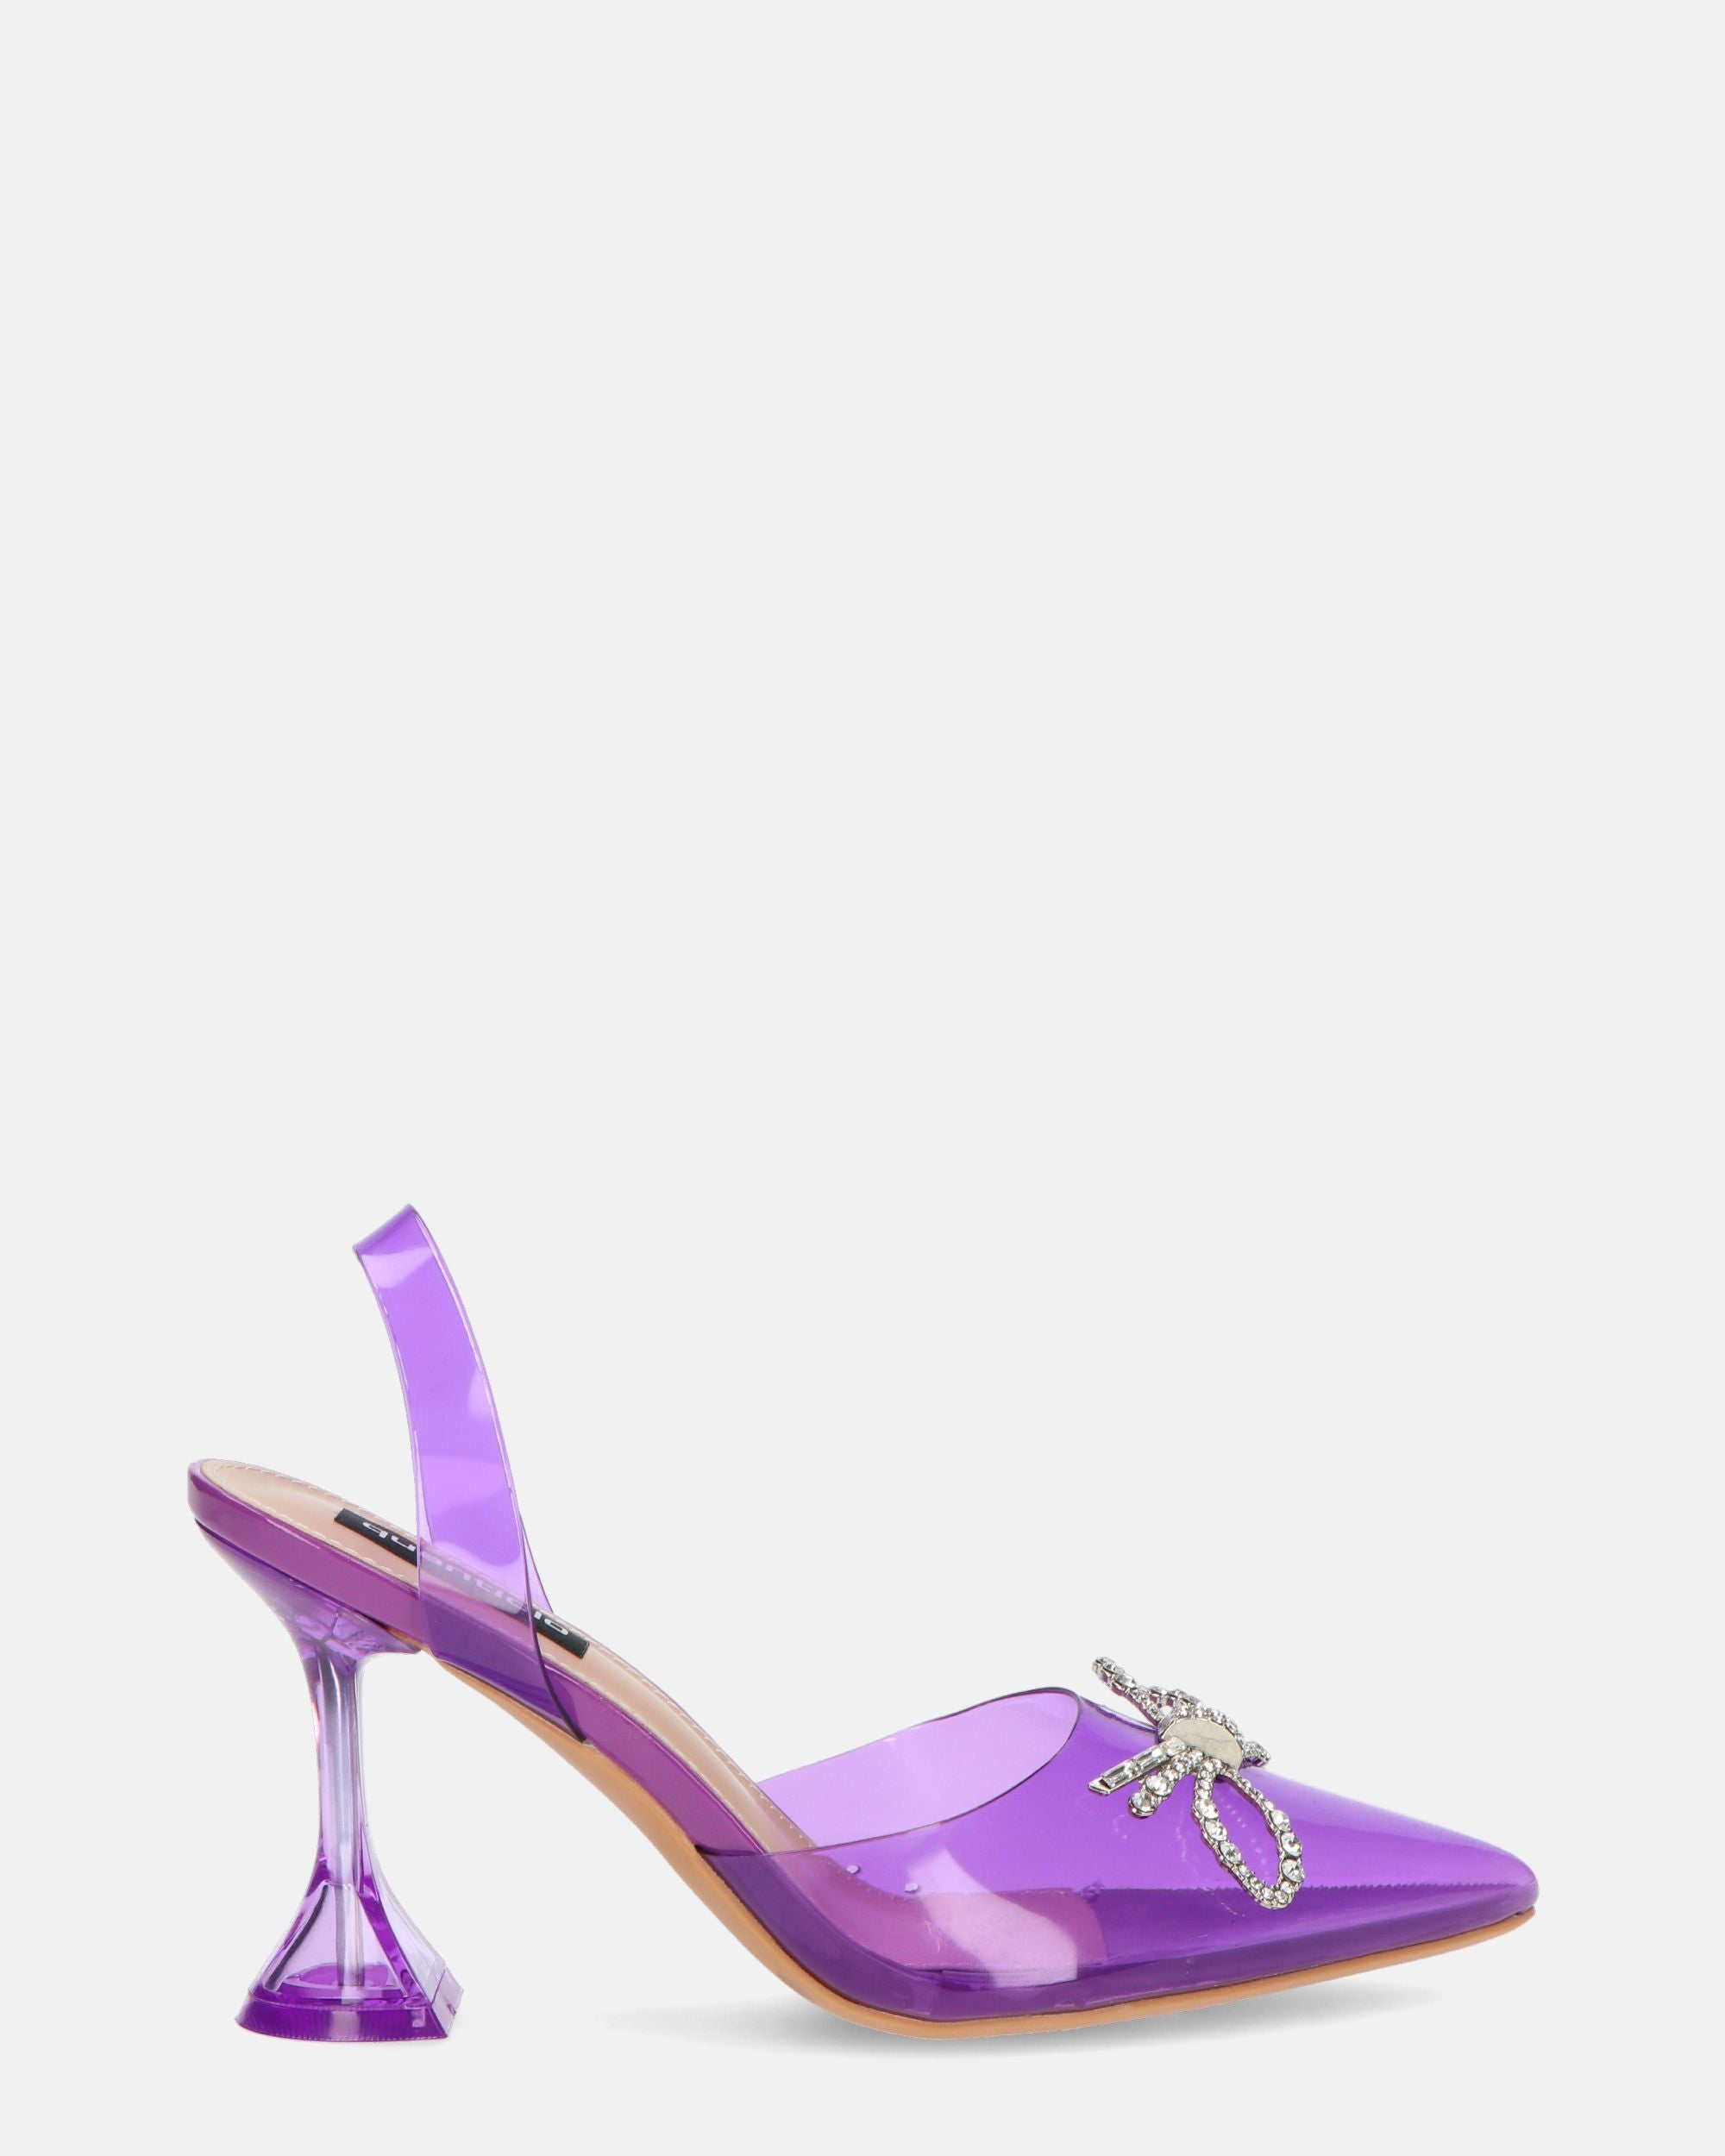 CONSUELO - violet perspex heels with toe decorations